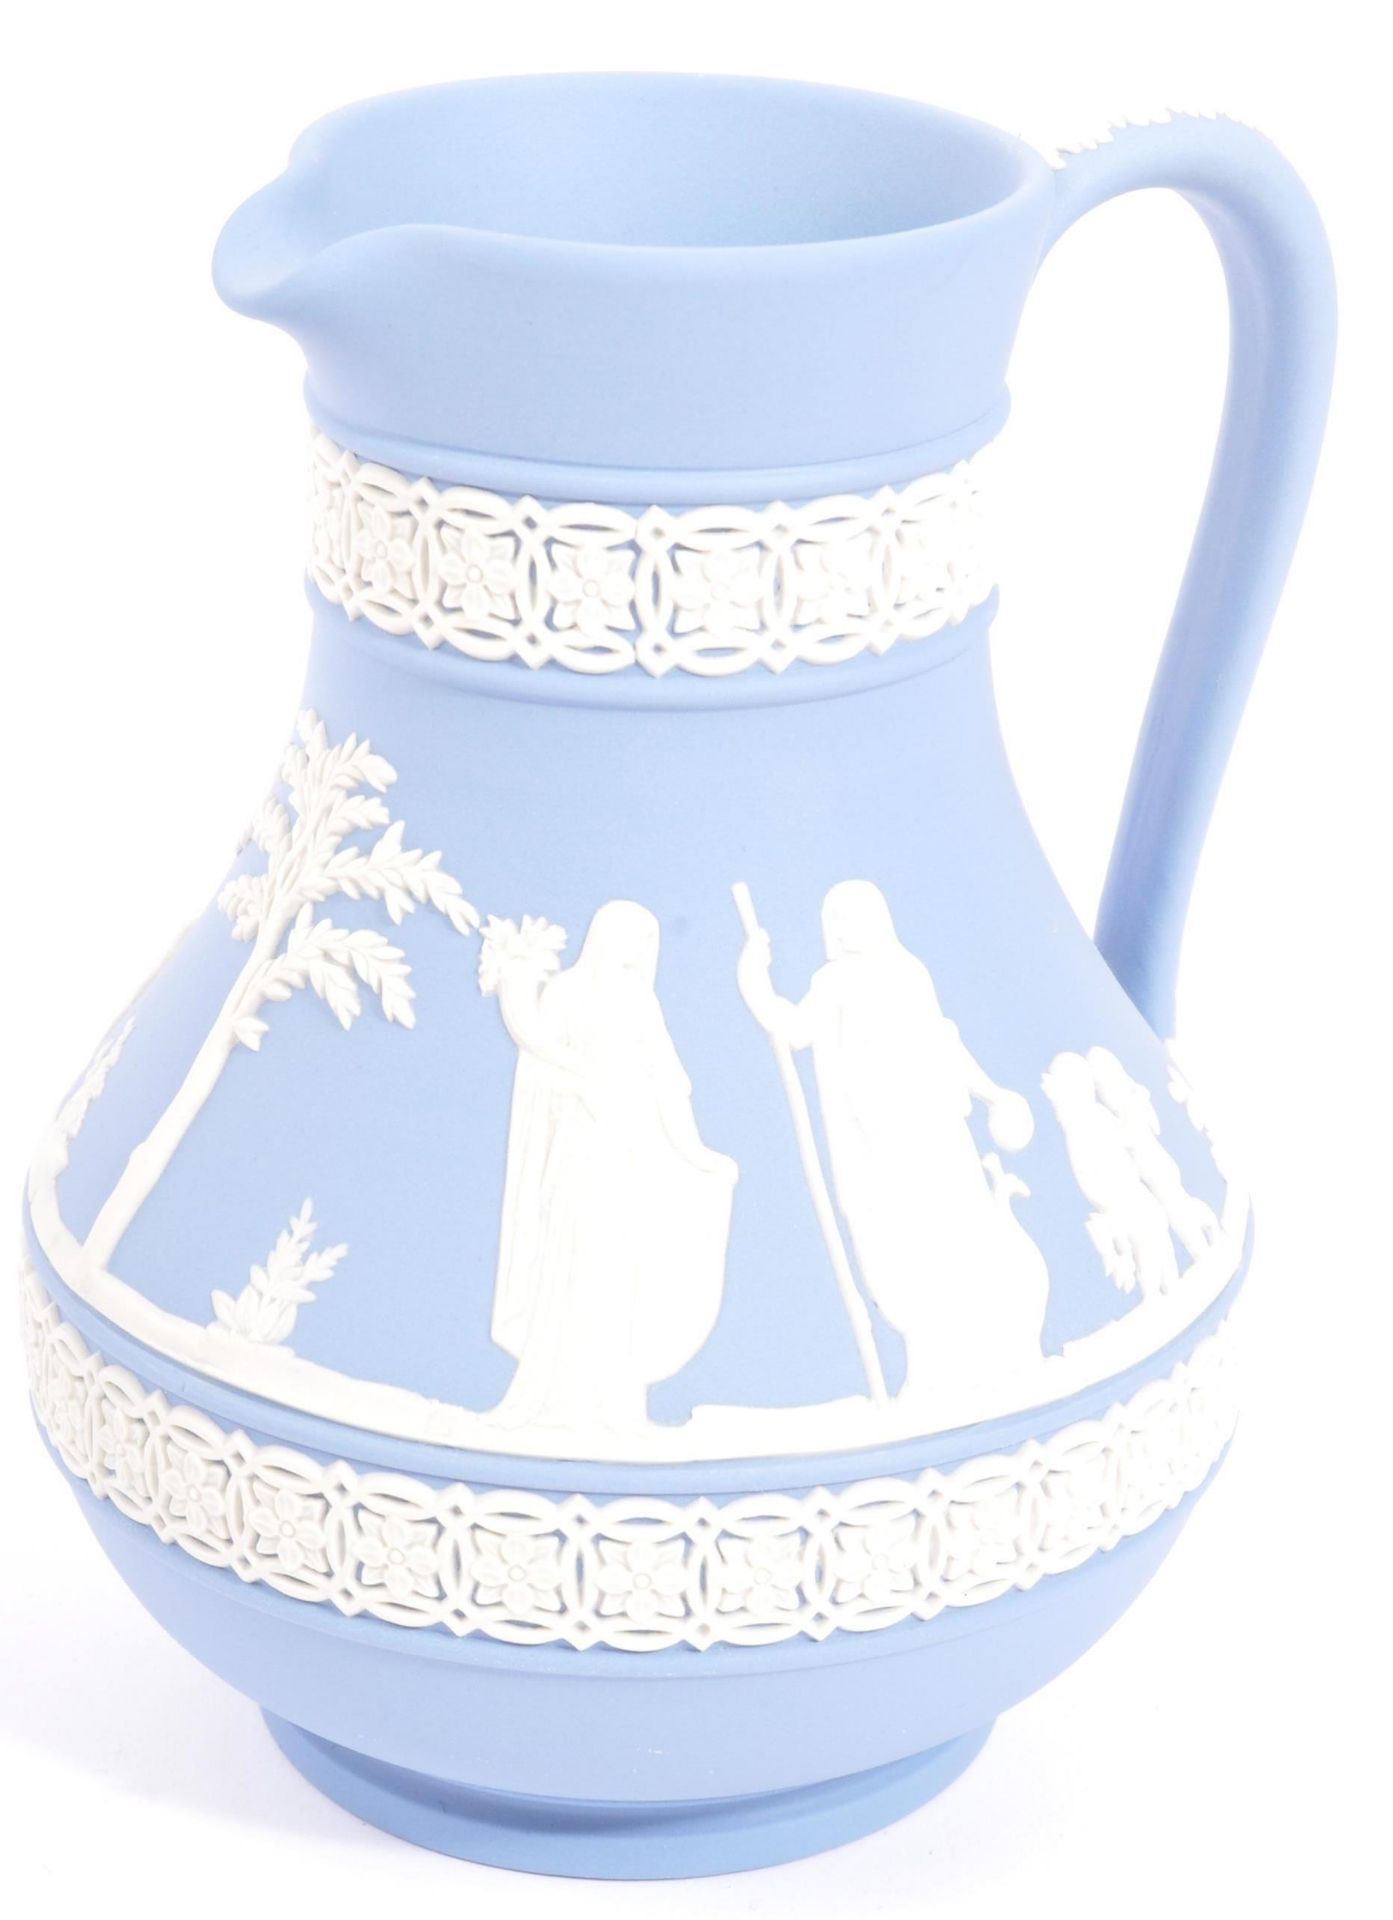 TWO PIECES OF WEDGWOOD JASPERWARE IN JUG AND POT FORM - Image 2 of 6